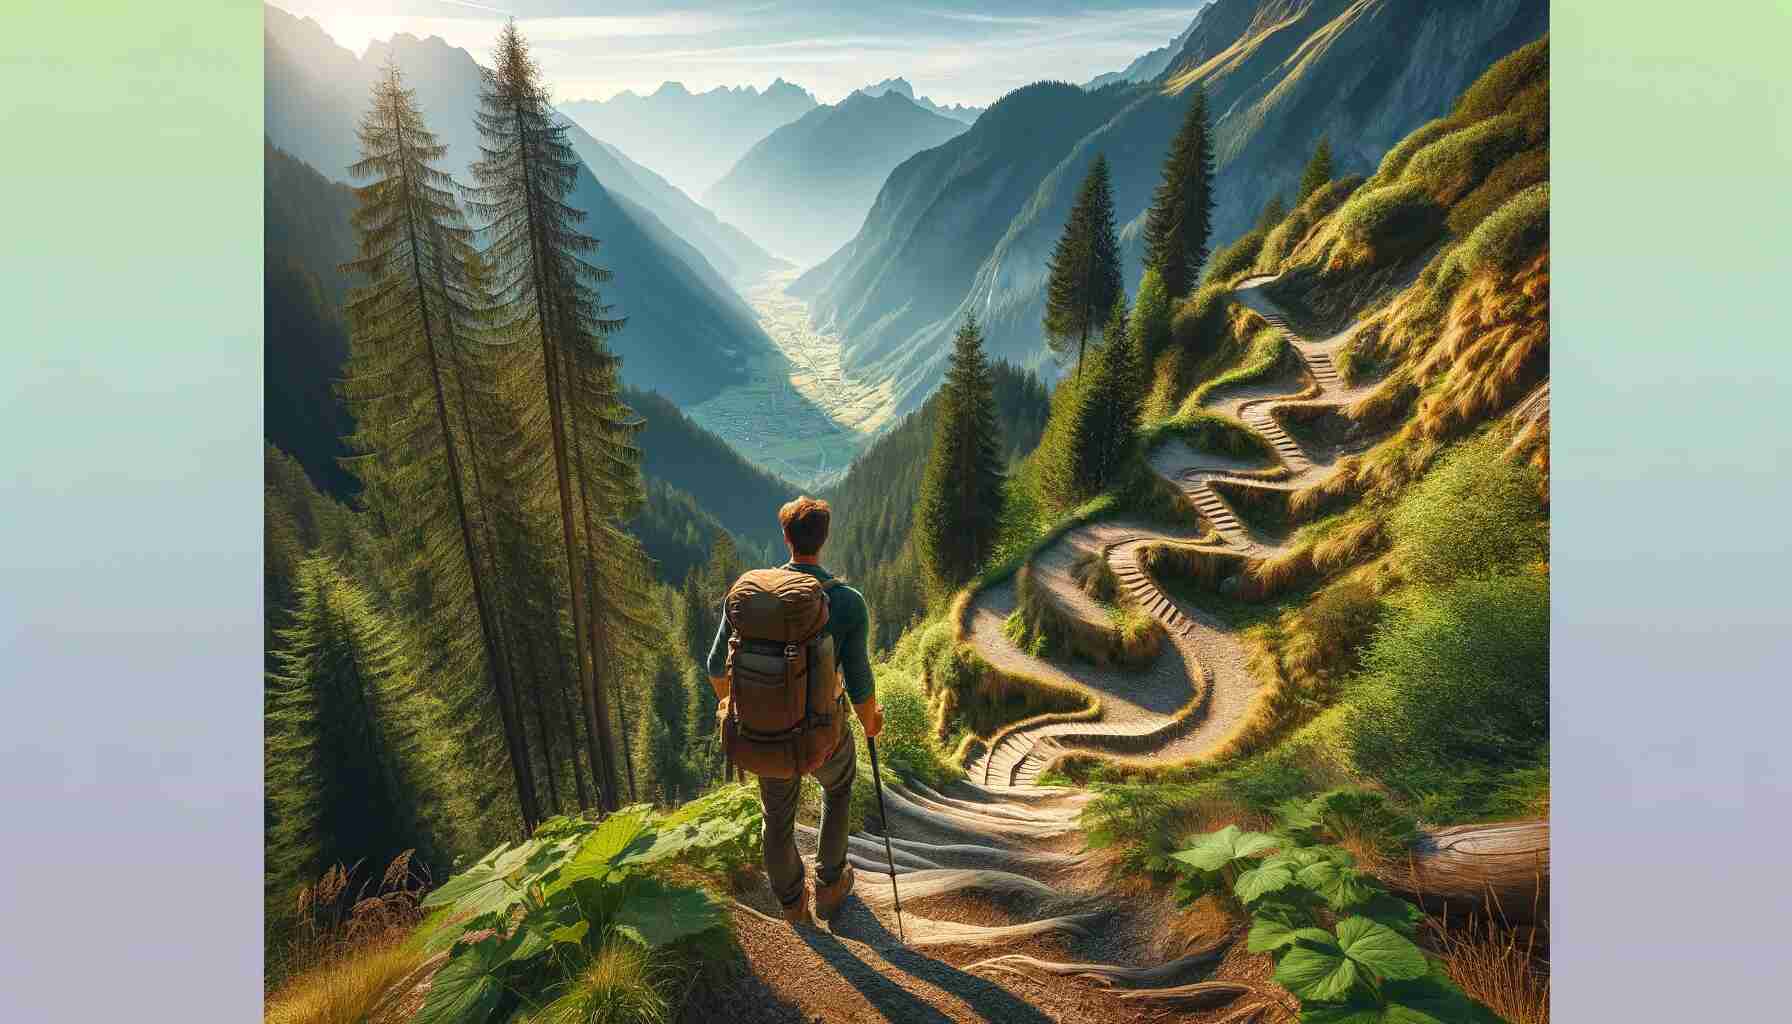 An image depicting an adventurous hiker with a backpack navigating switchbacks on a steep mountain trail. The zigzagging path is surrounded by lush greenery and tall trees, under a clear blue sky with bright sunshine. The hiker pauses to admire a stunning valley view below, considering the path ahead. The title "Exploring Switchbacks in Hiking: What Are They and How to Tackle Them?" is prominently displayed at the top.